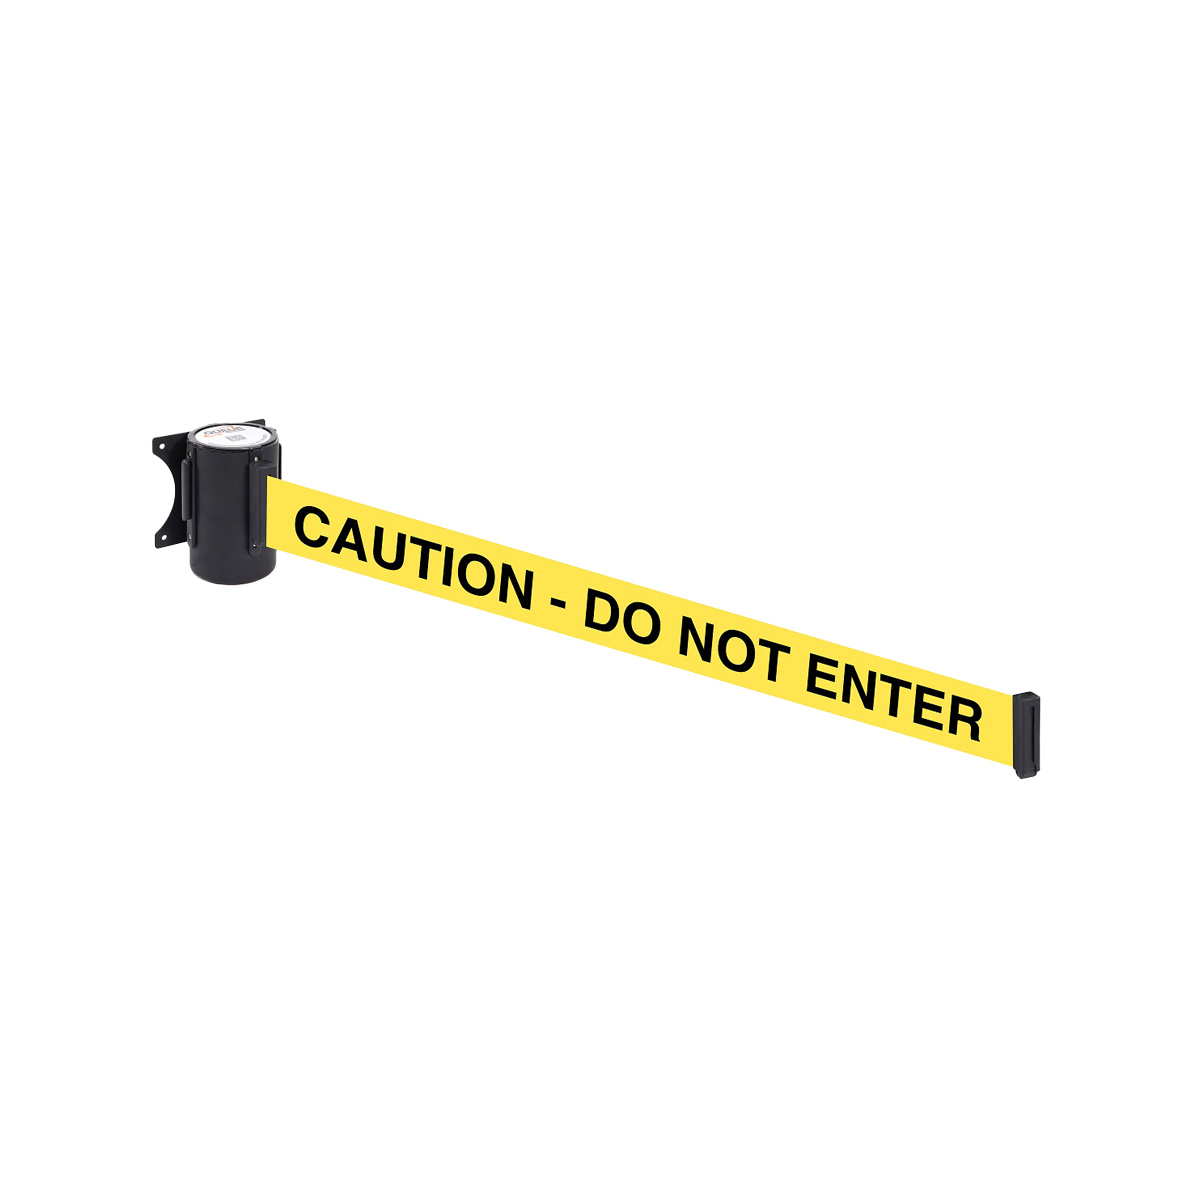 WallMaster Wall Mounted Retractable Barriers With Nine Pre-Printed Message Belts